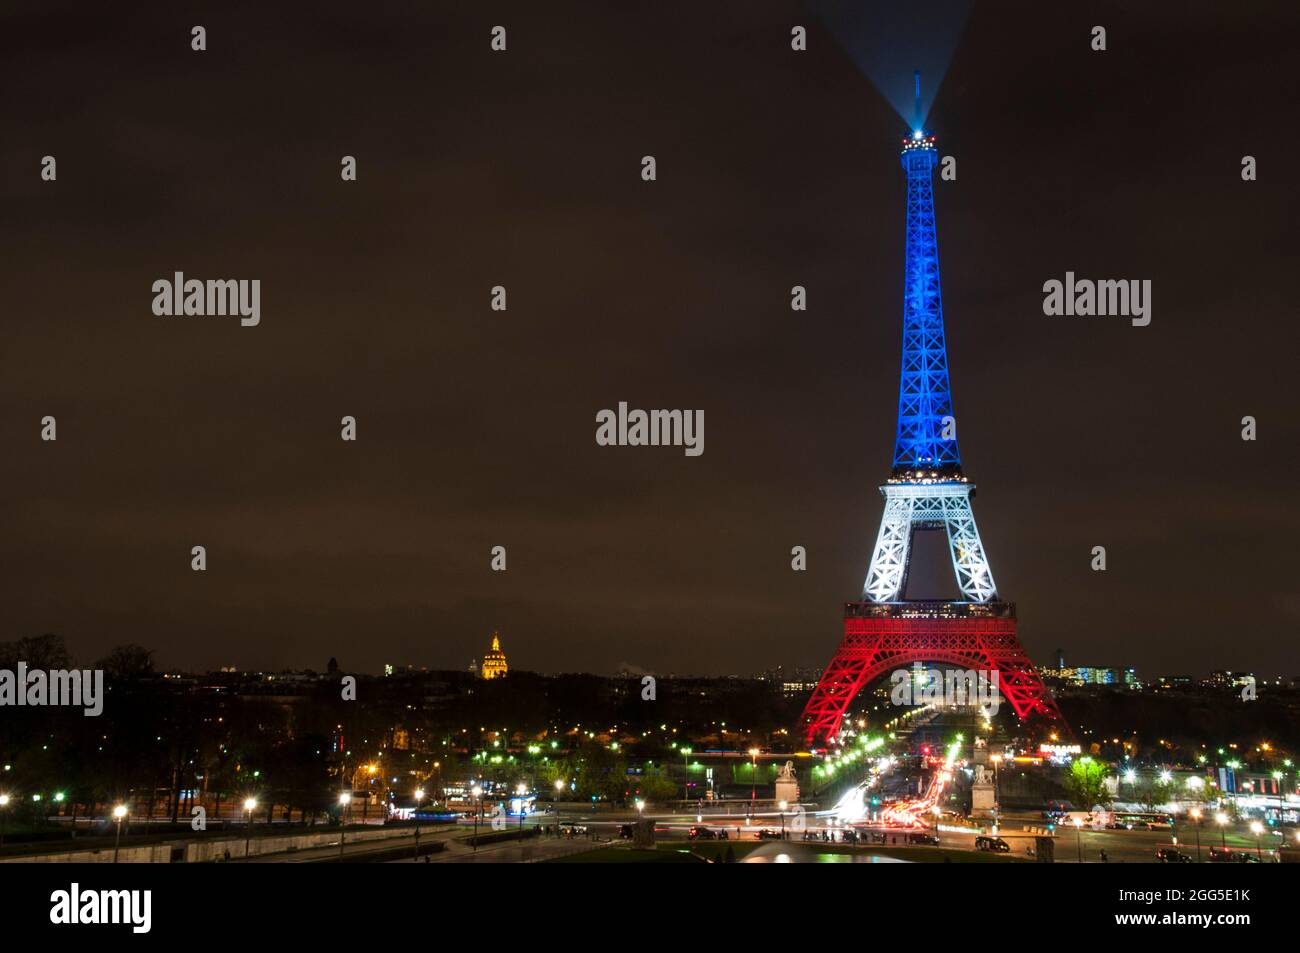 FRANCE. PARIS (7TH DISTRICT). 2015-11-16: THE EIFFEL TOWER IS LIT UP WITH THE COLORS OF THE FRENCH NATIONAL FLAG TO HONOR THE VICTIMS OF TERRORIST ATT Stock Photo